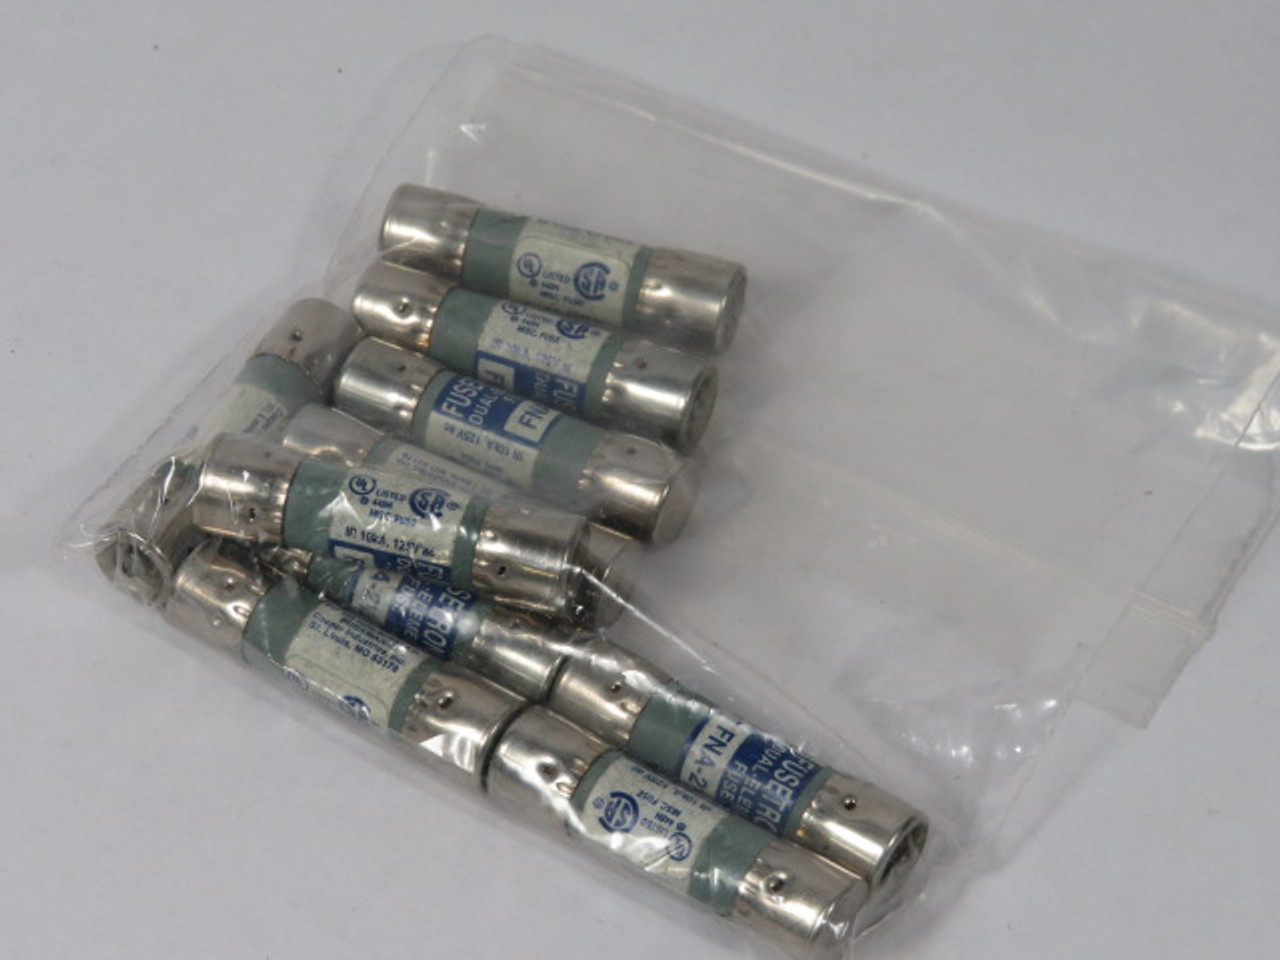 Fusetron FNA-2-1/2 Dual Element Fuse 2-1/2A 125V Lot of 10 USED